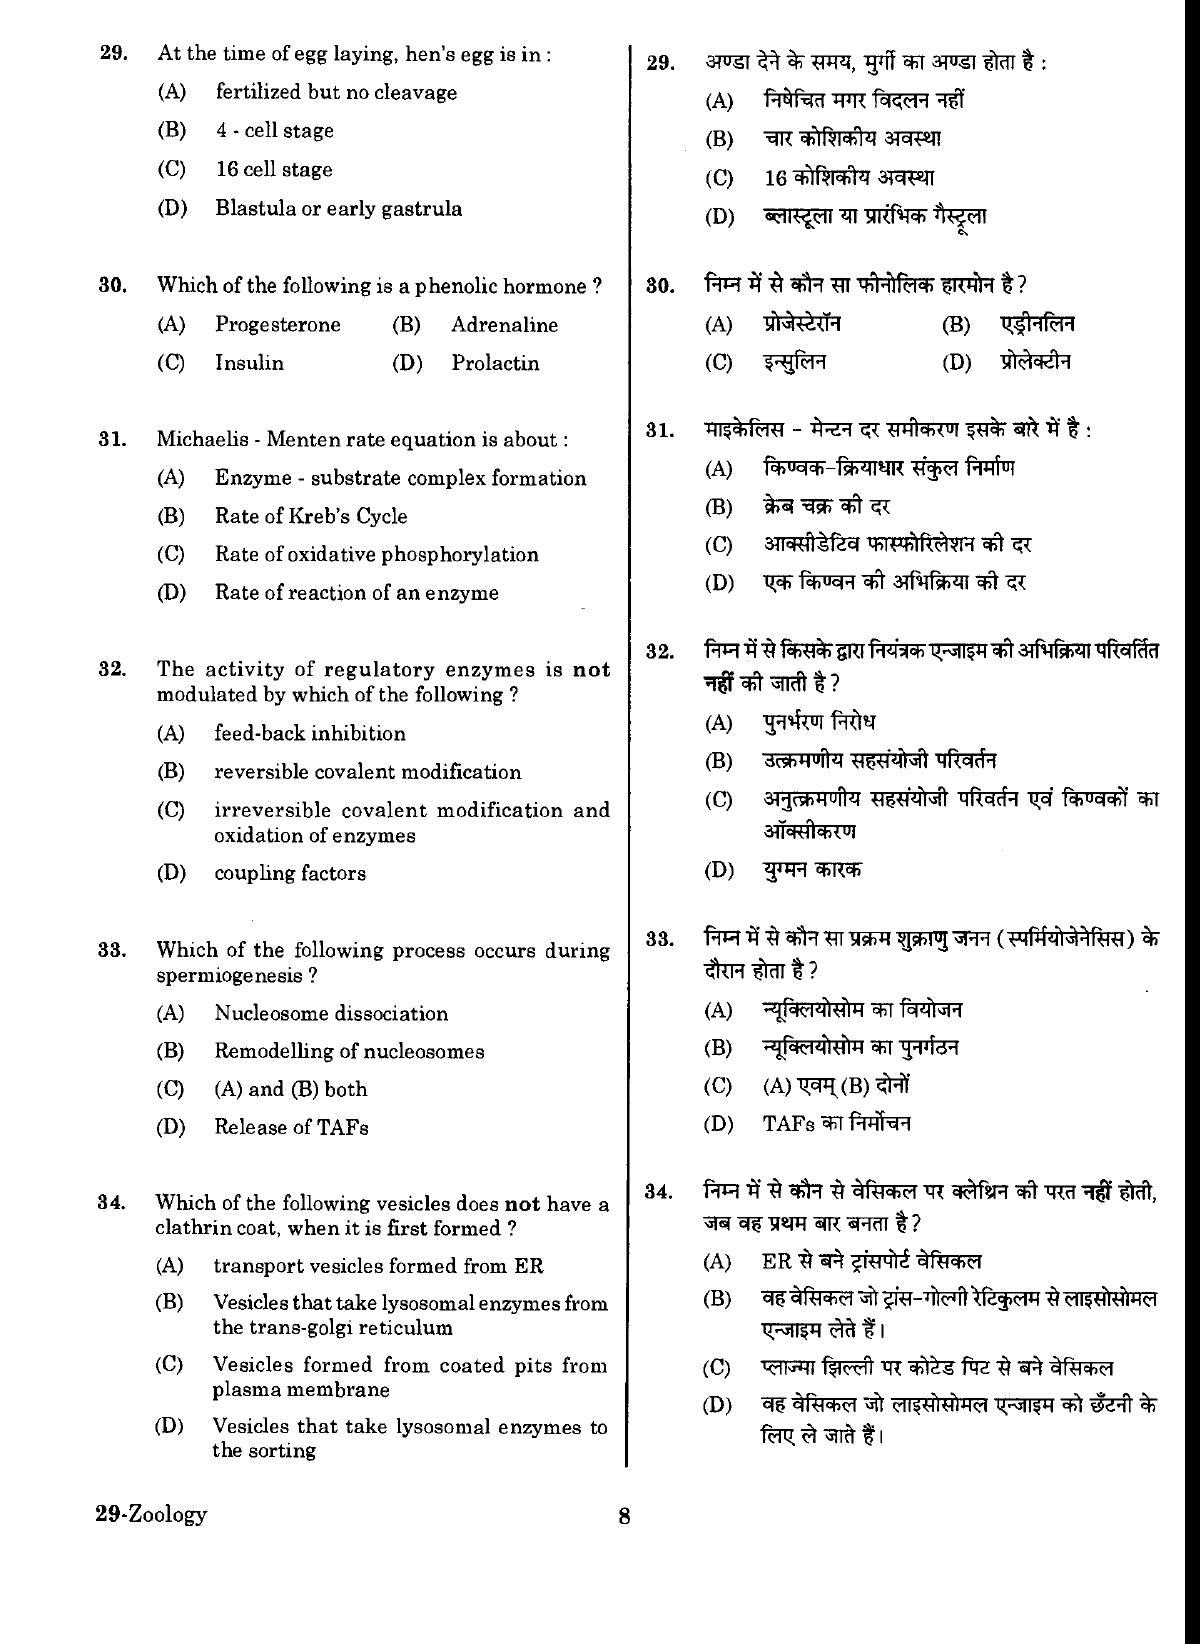 URATPG Zoology Sample Question Paper 2018 - Page 7